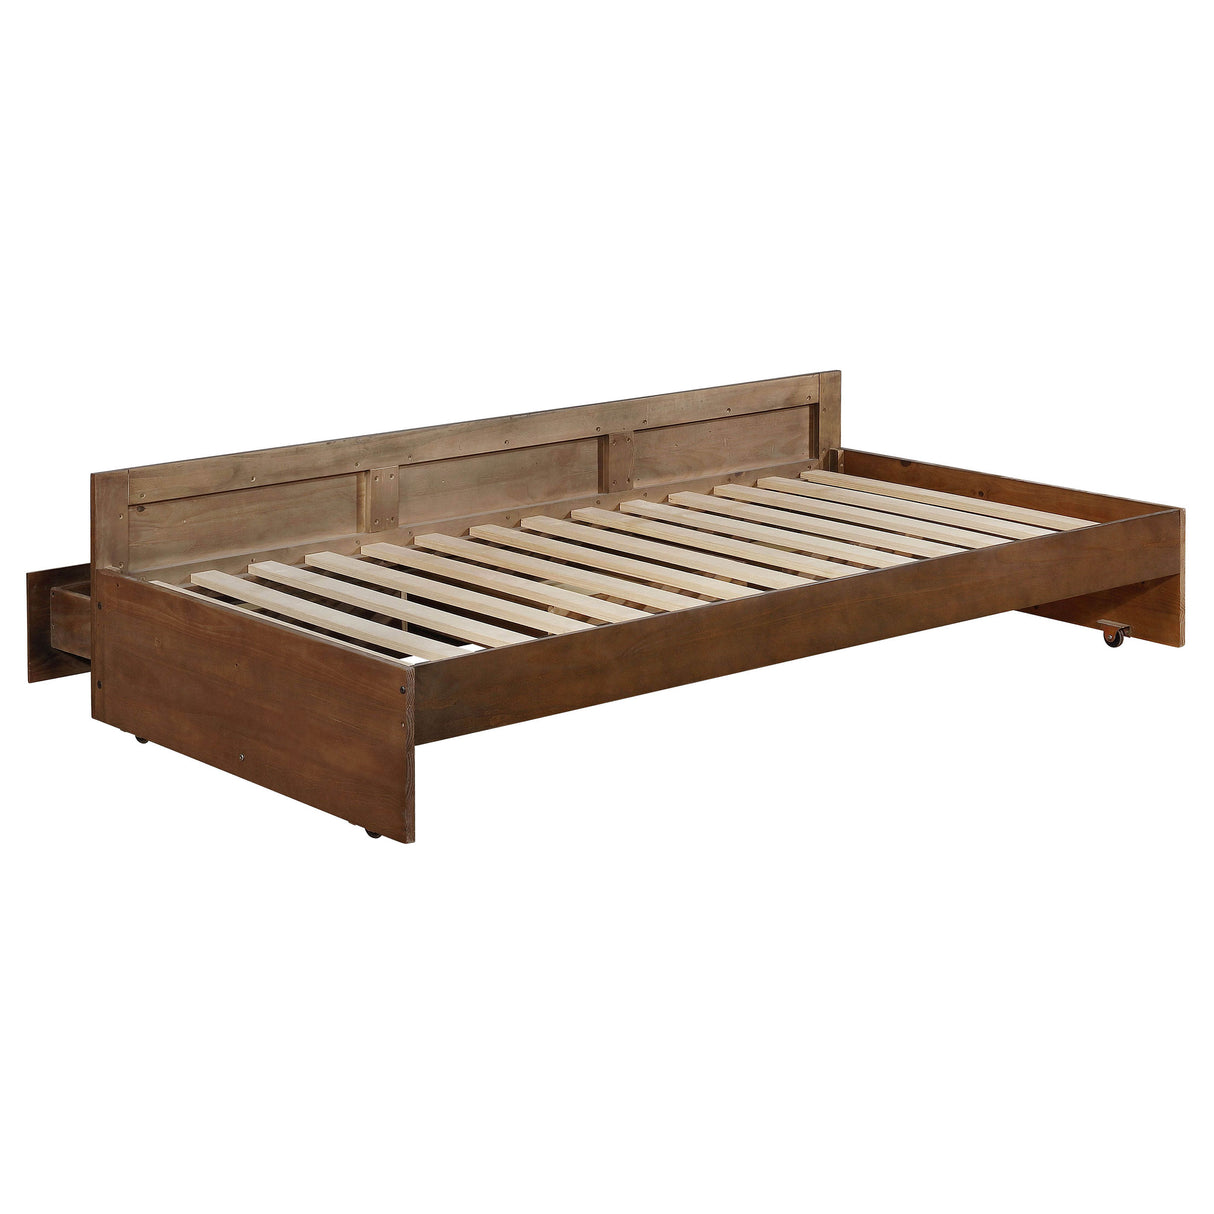 Twin Xl / Queen Bunk Bed - Atkin Twin Extra Long over Queen 3-drawer Bunk Bed Weathered Walnut